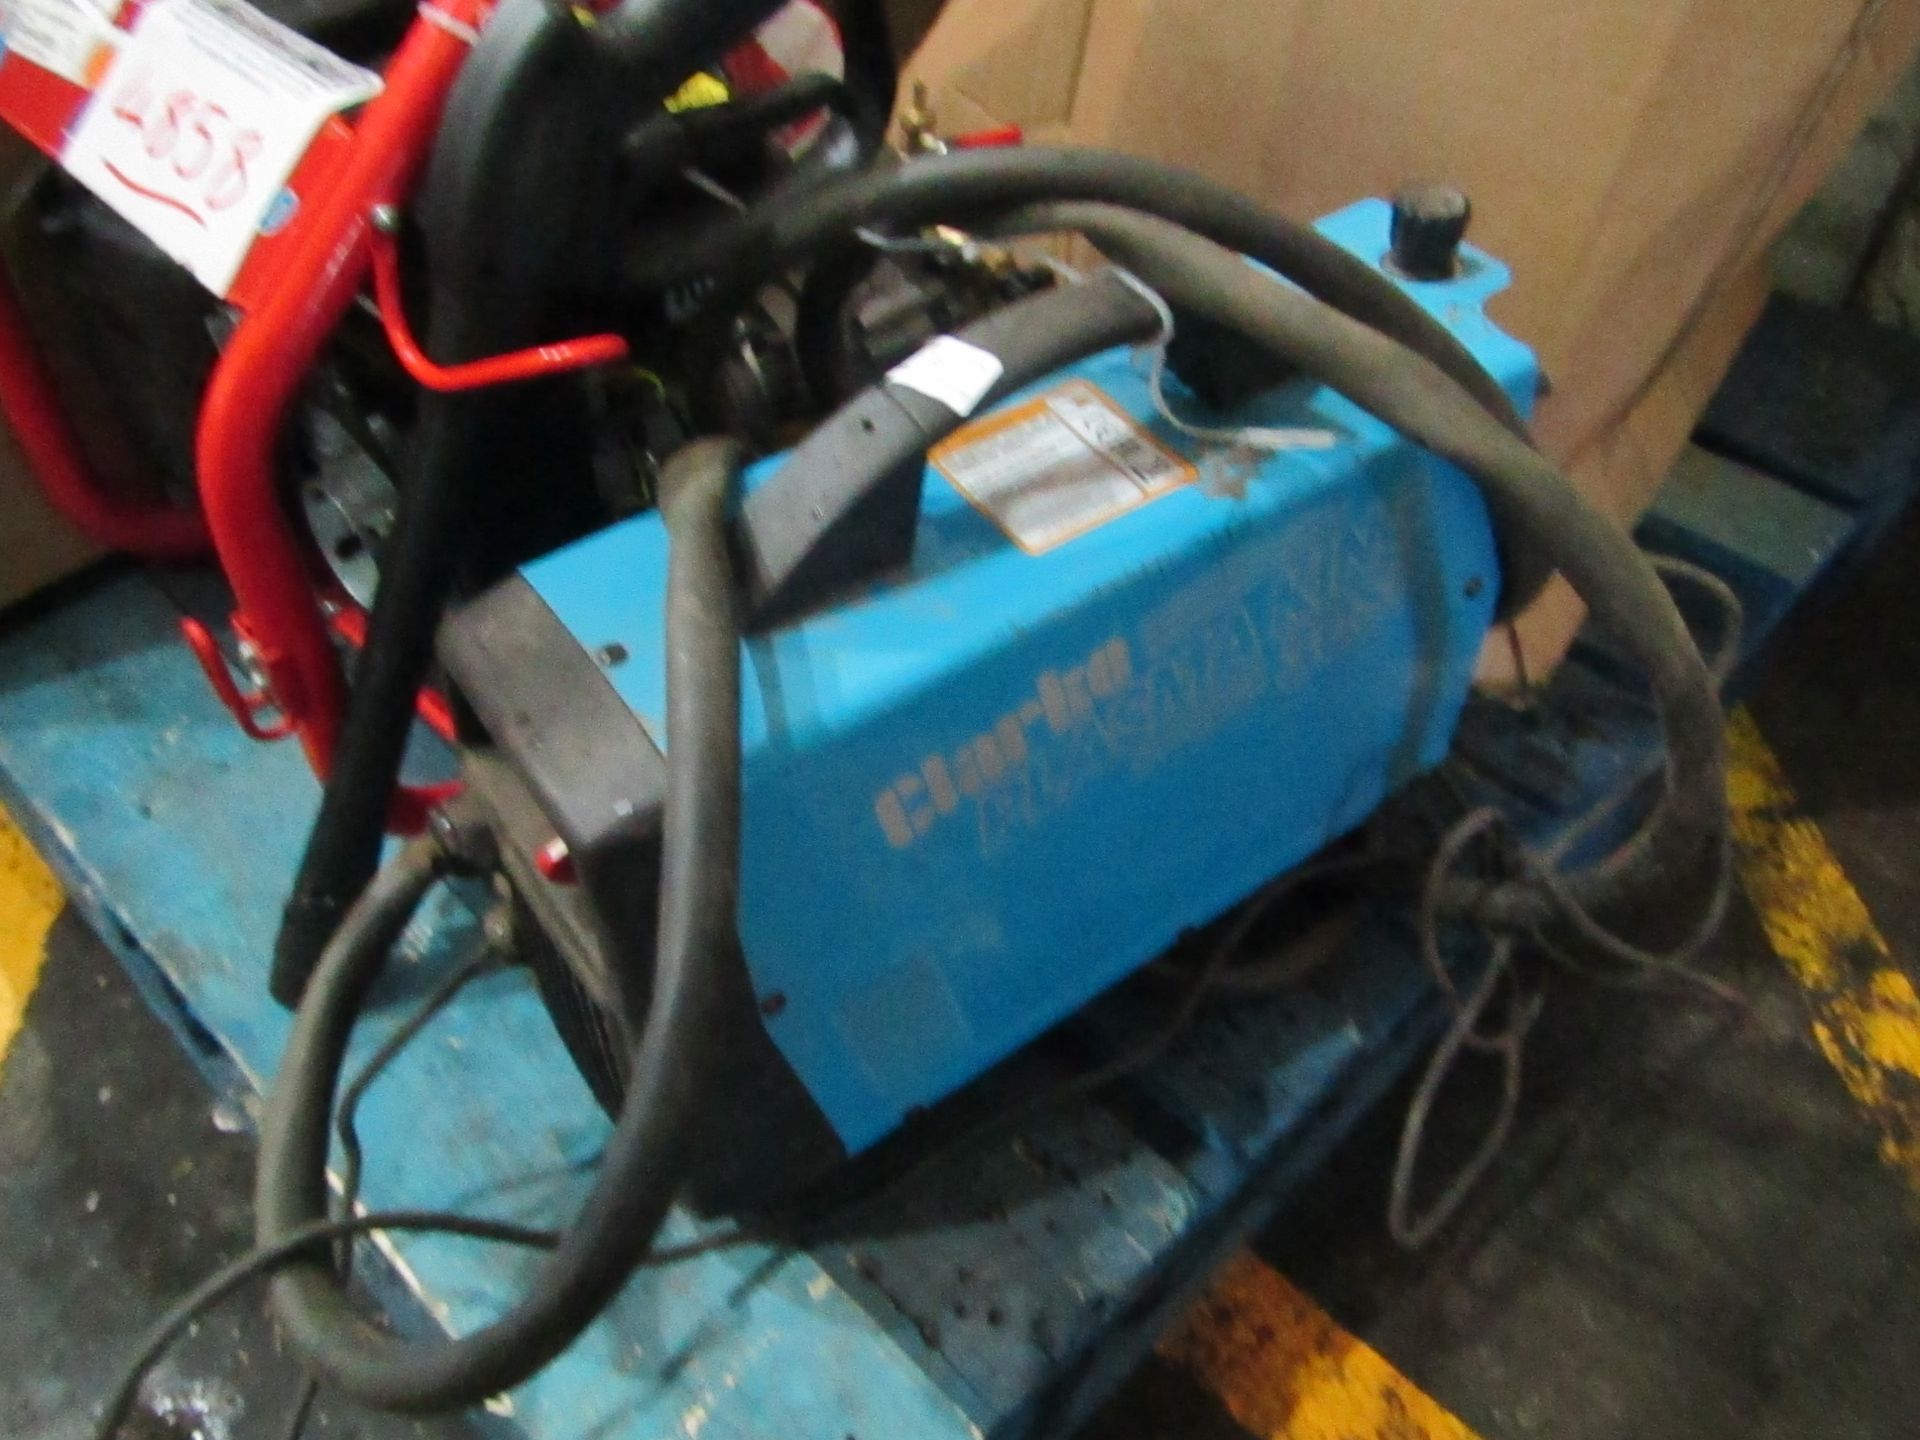 Clarke Plasma King 30Si Plasma Cutter, RRP £570 Please note; this is a raw return and unchecked lot.